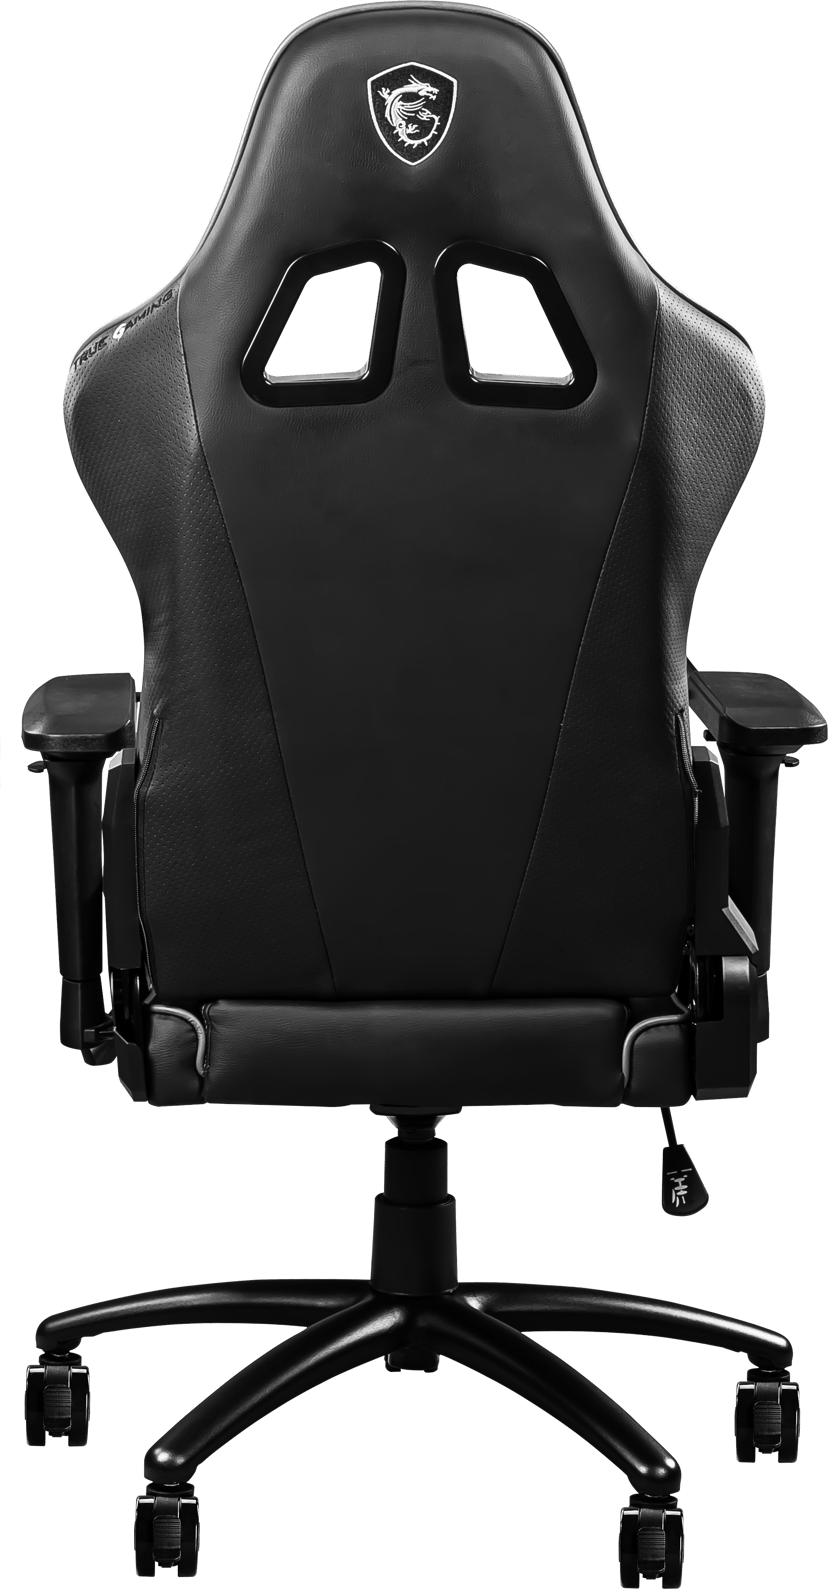 MSI Gaming Chair MAG CH120 I